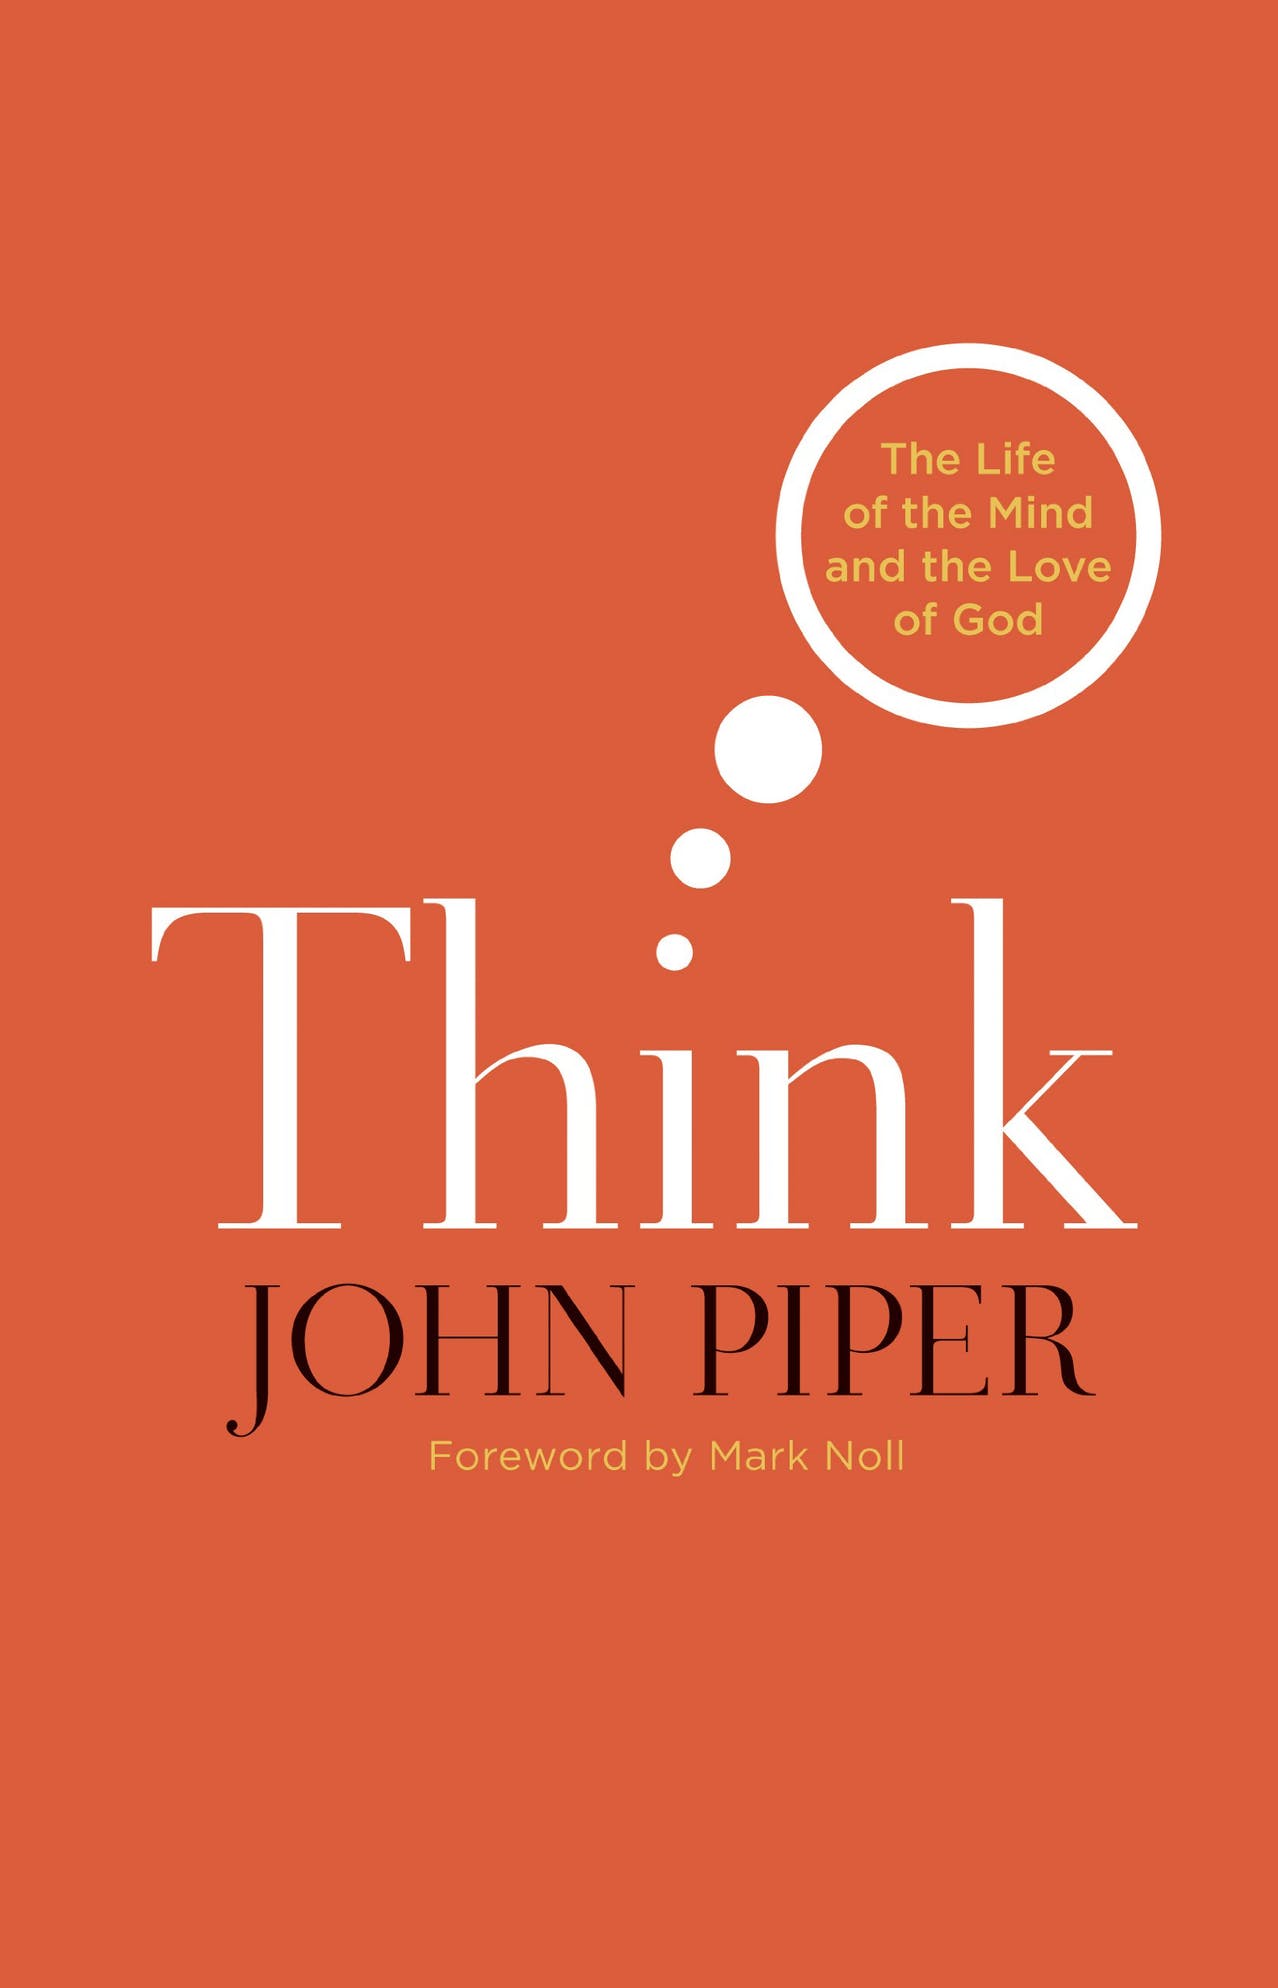 DOWNLOAD PDF: Think! by John Piper 19